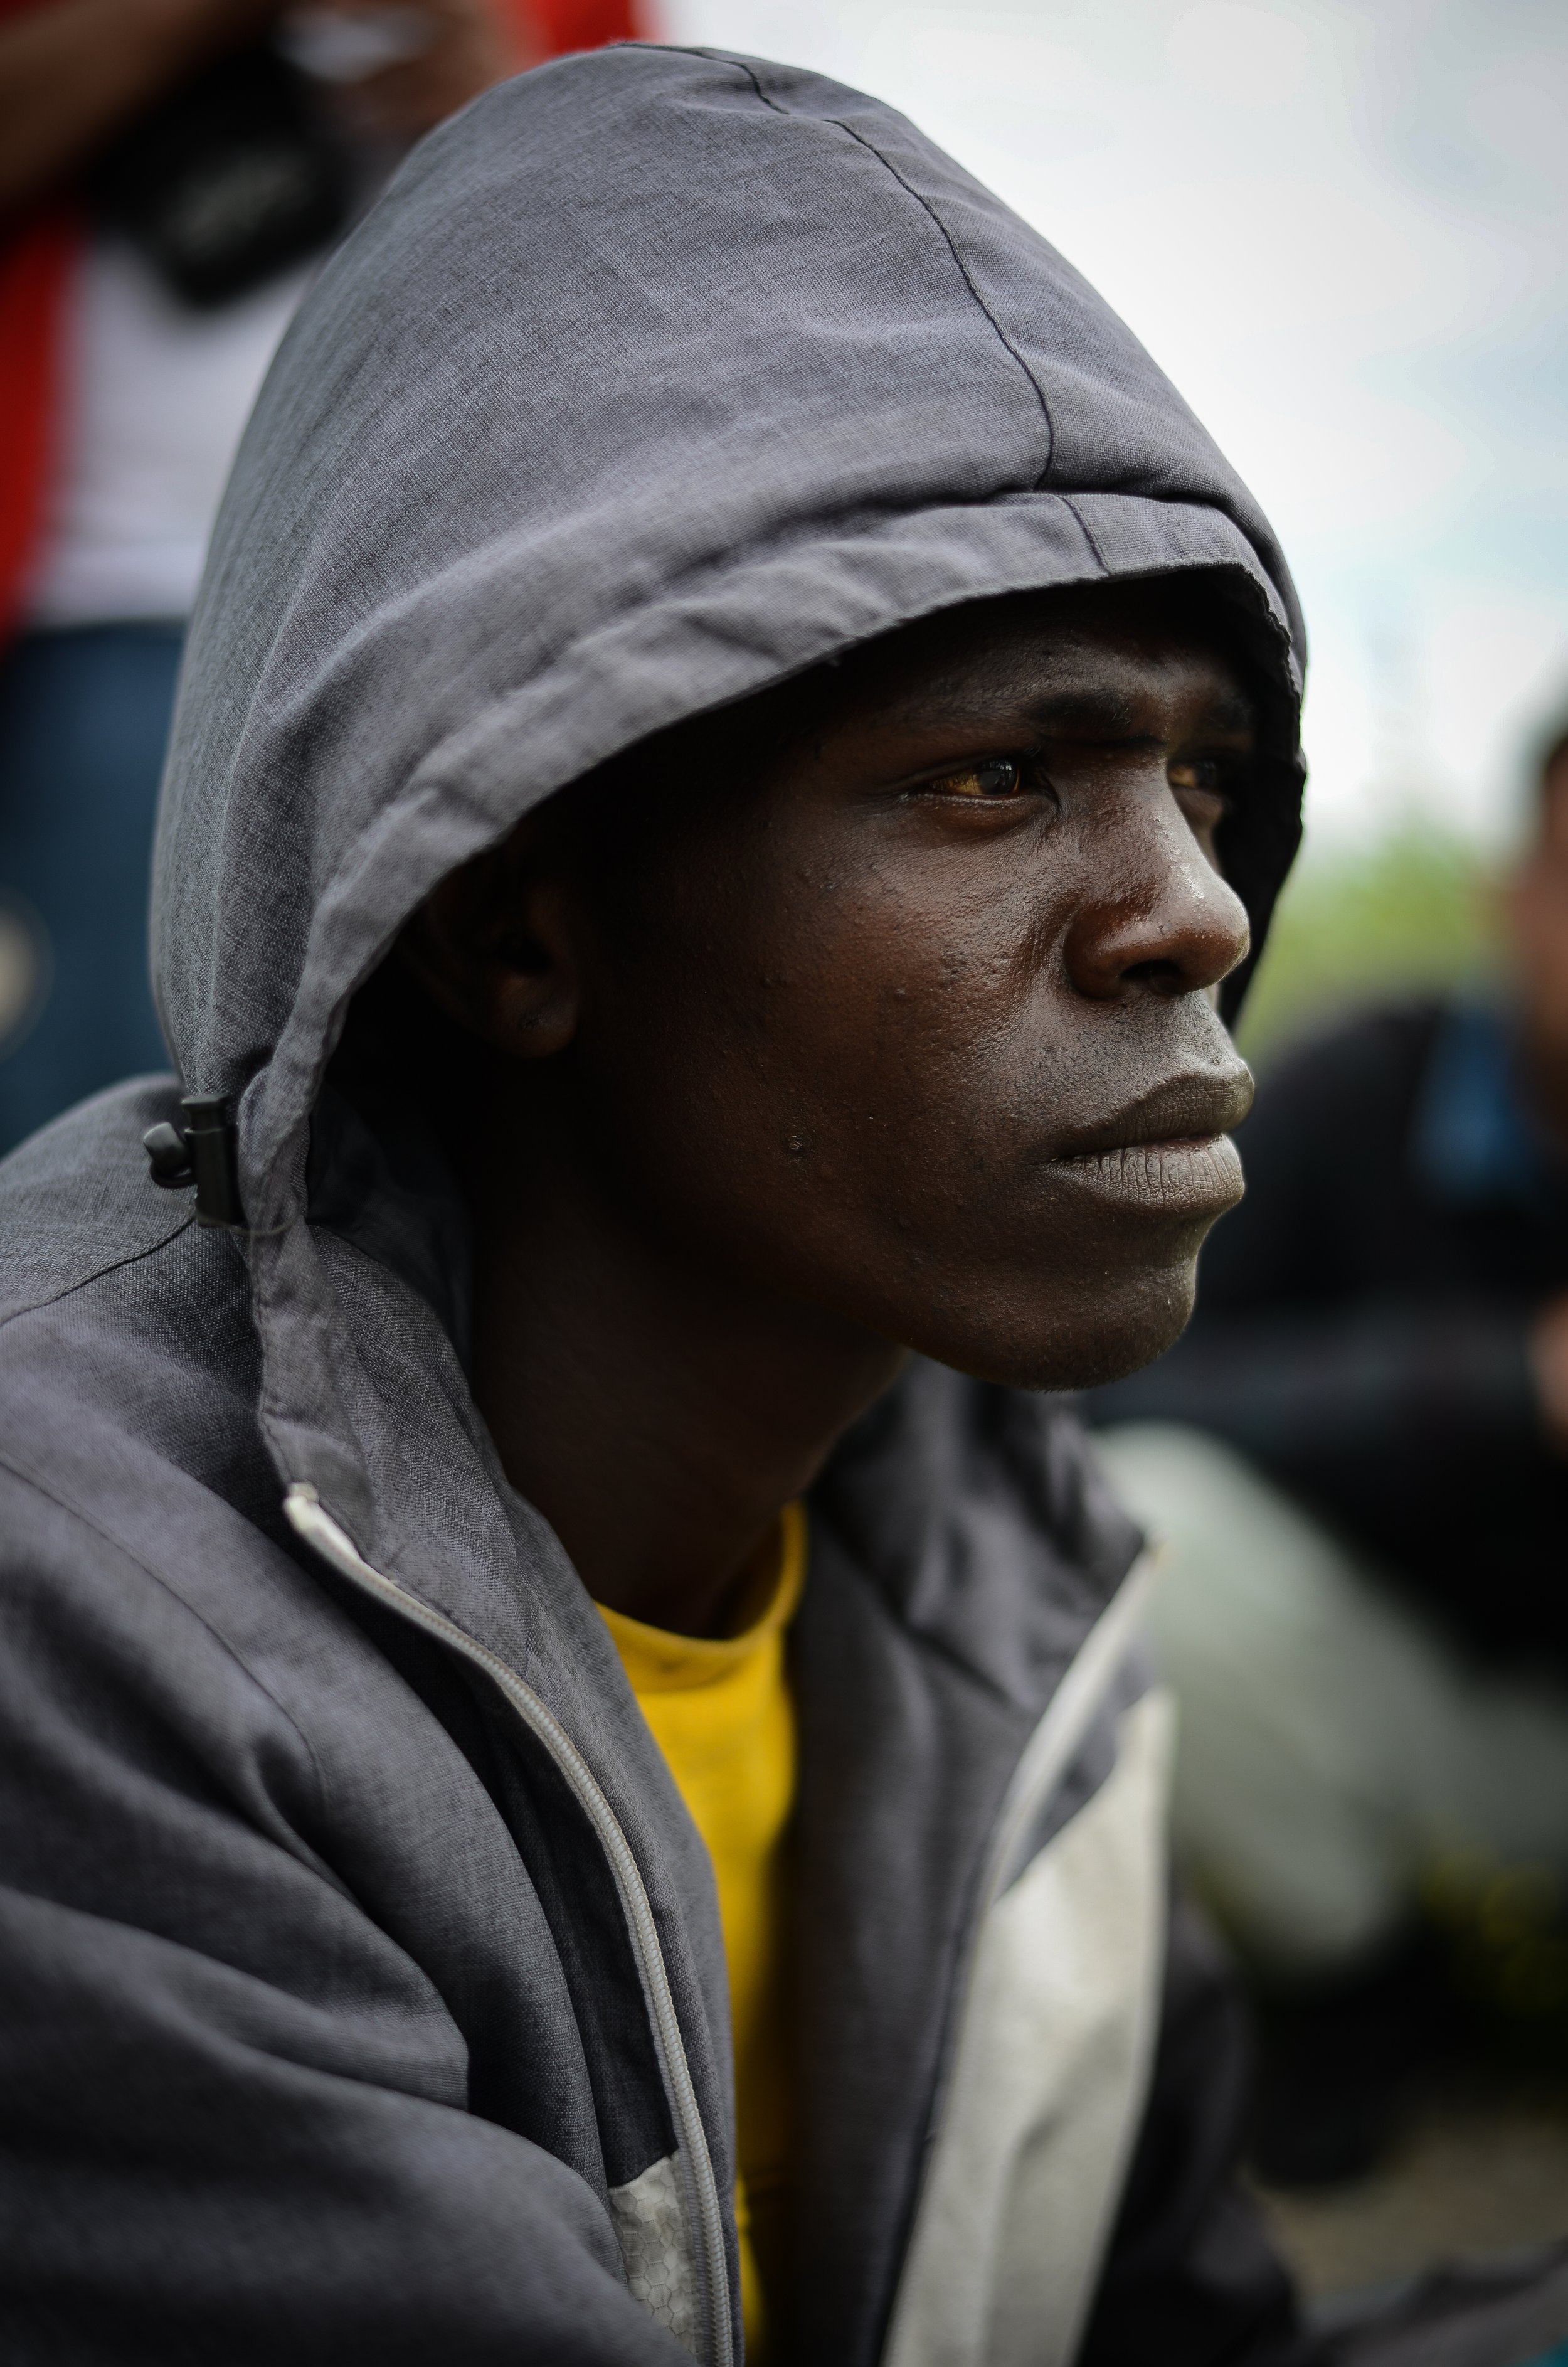  This amazing teenage boy from Niger (who was fluent in at least 3 languages) politely and calmly explained to me that his knee was injured by #police during the last big #eviction in Calais almost a month ago. They had shot him with a rubber bullet.